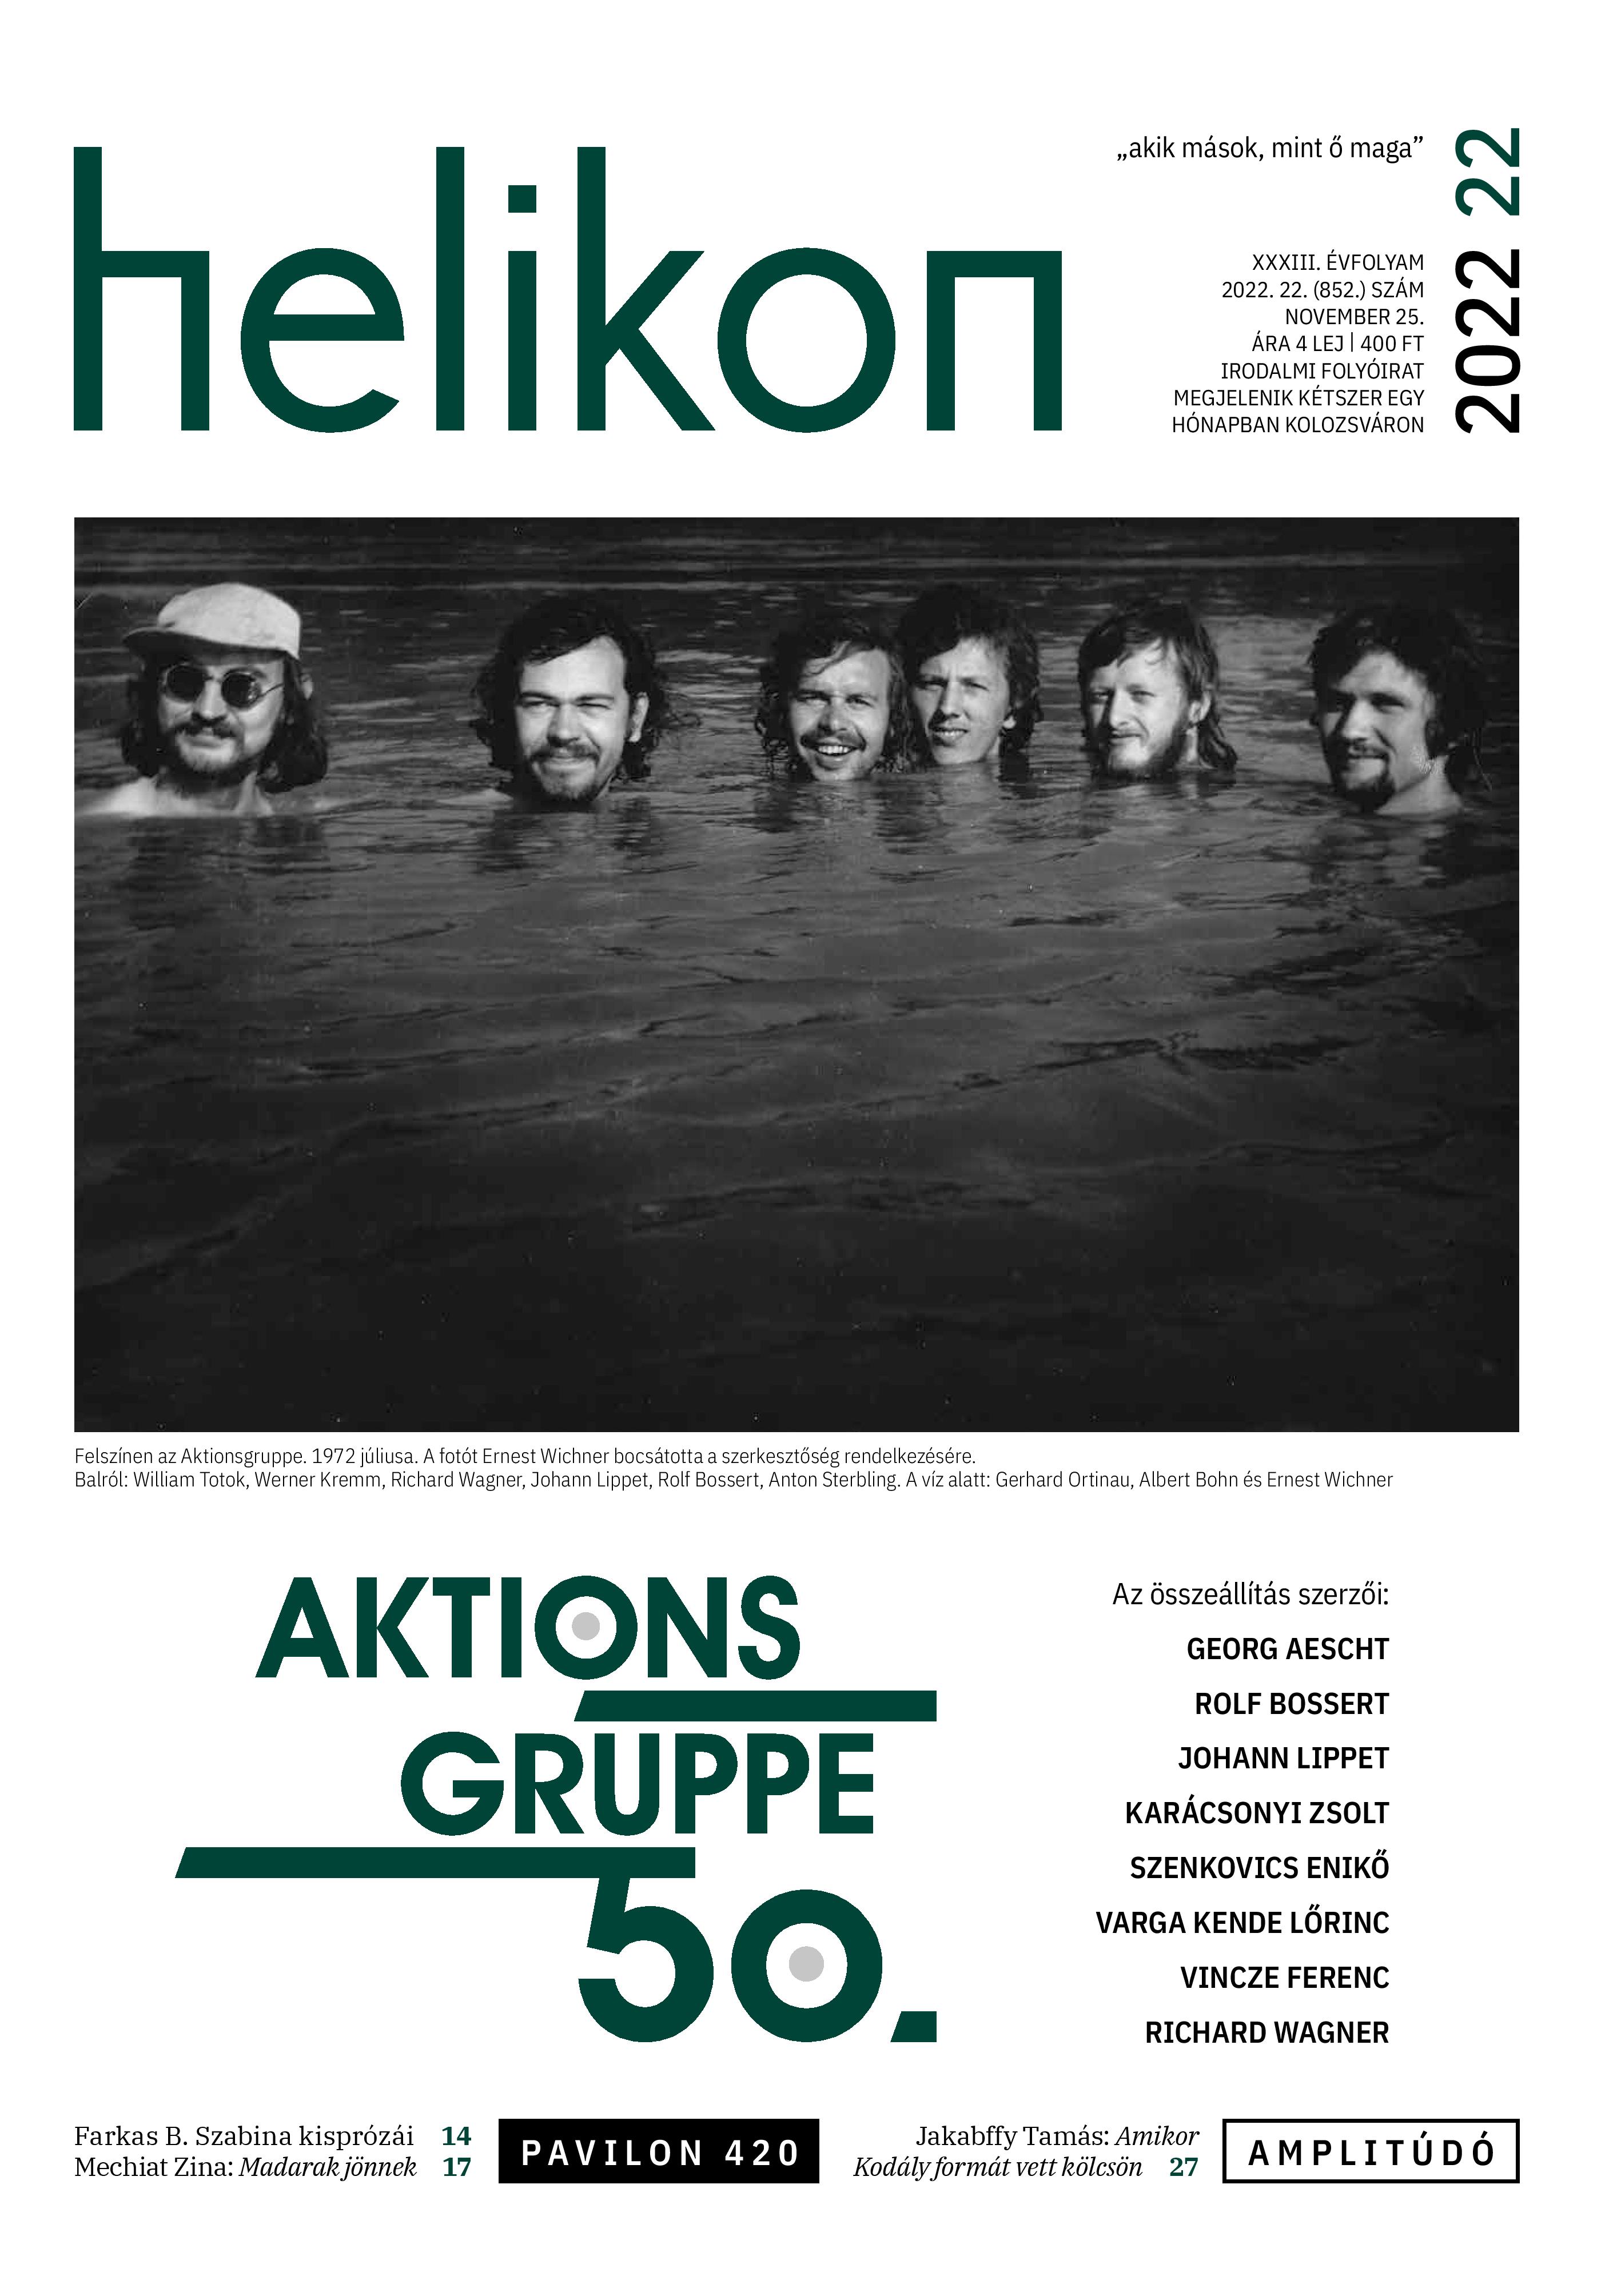 When Will Mattered. The 50 Year-Old Aktiongruppe Banat's Three-Year Attempts At Helping Its Case Cover Image